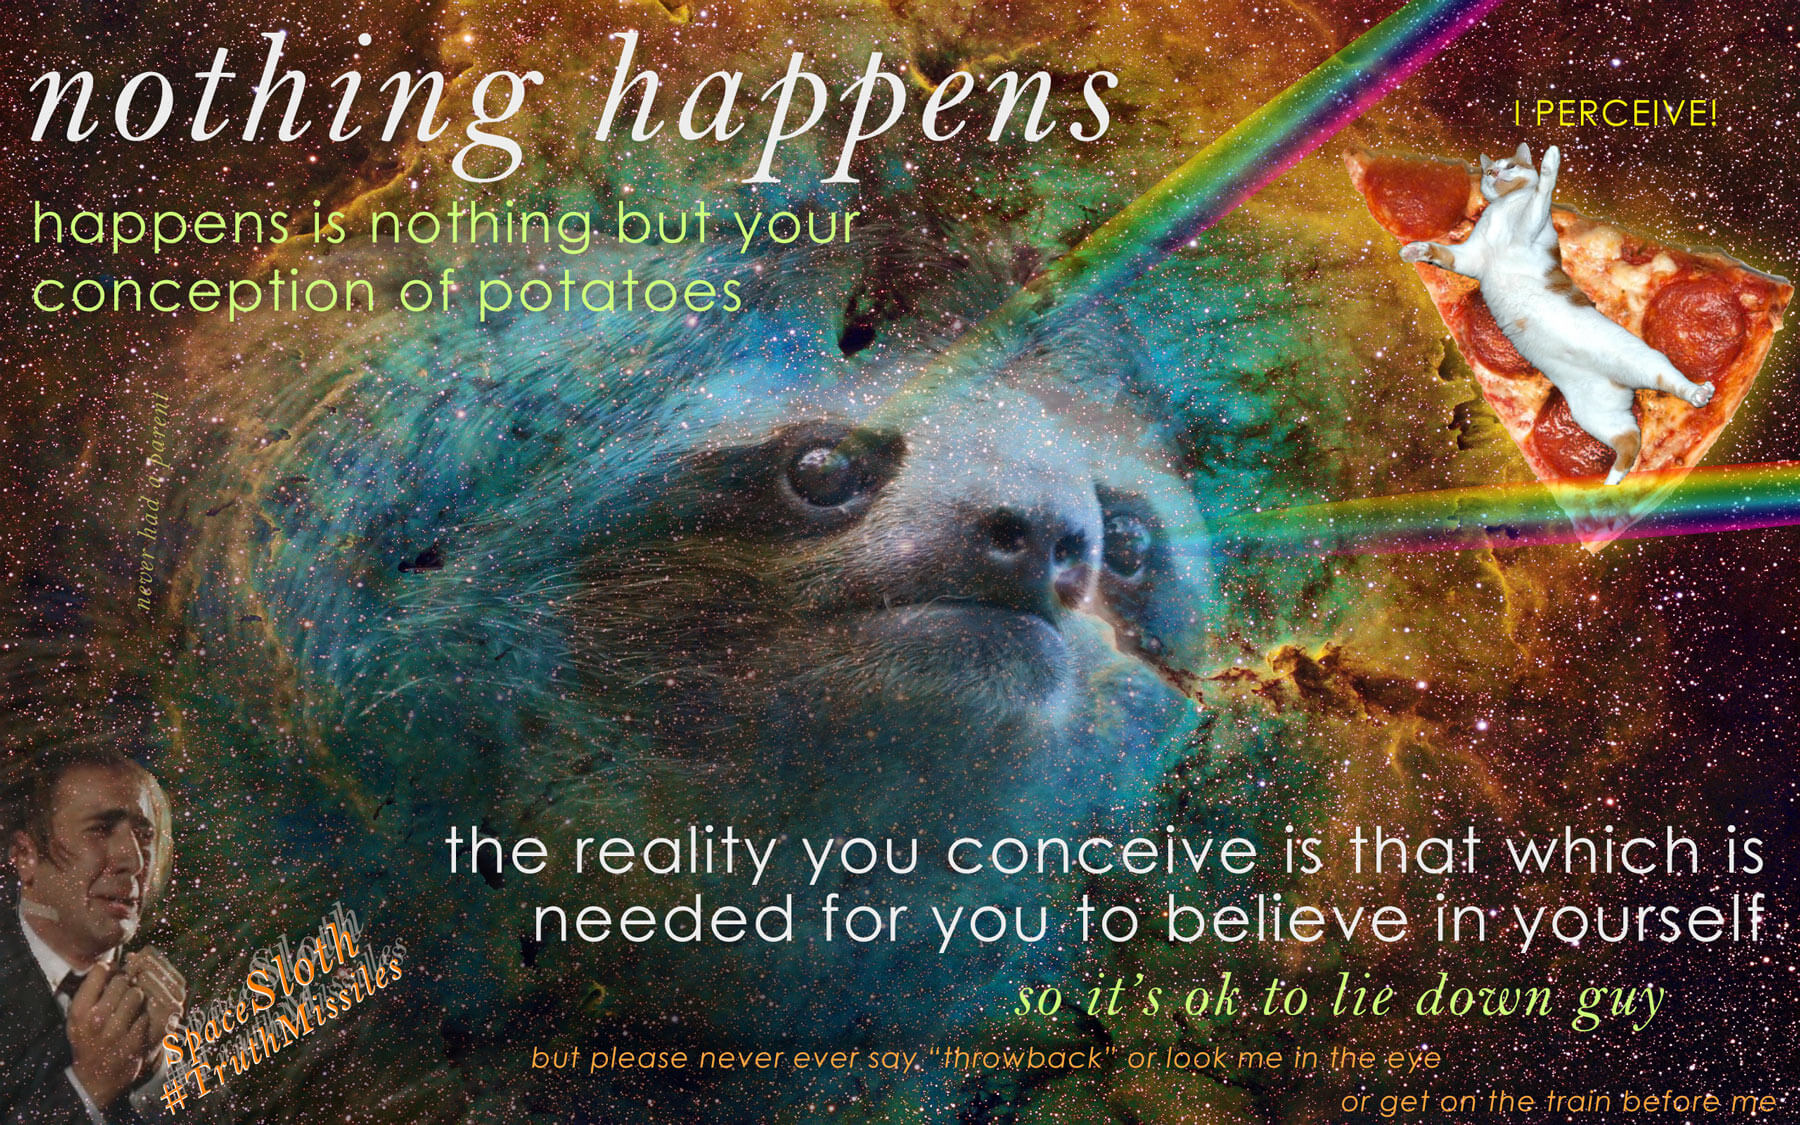 Space Sloth says Nothing Happens For a Reason